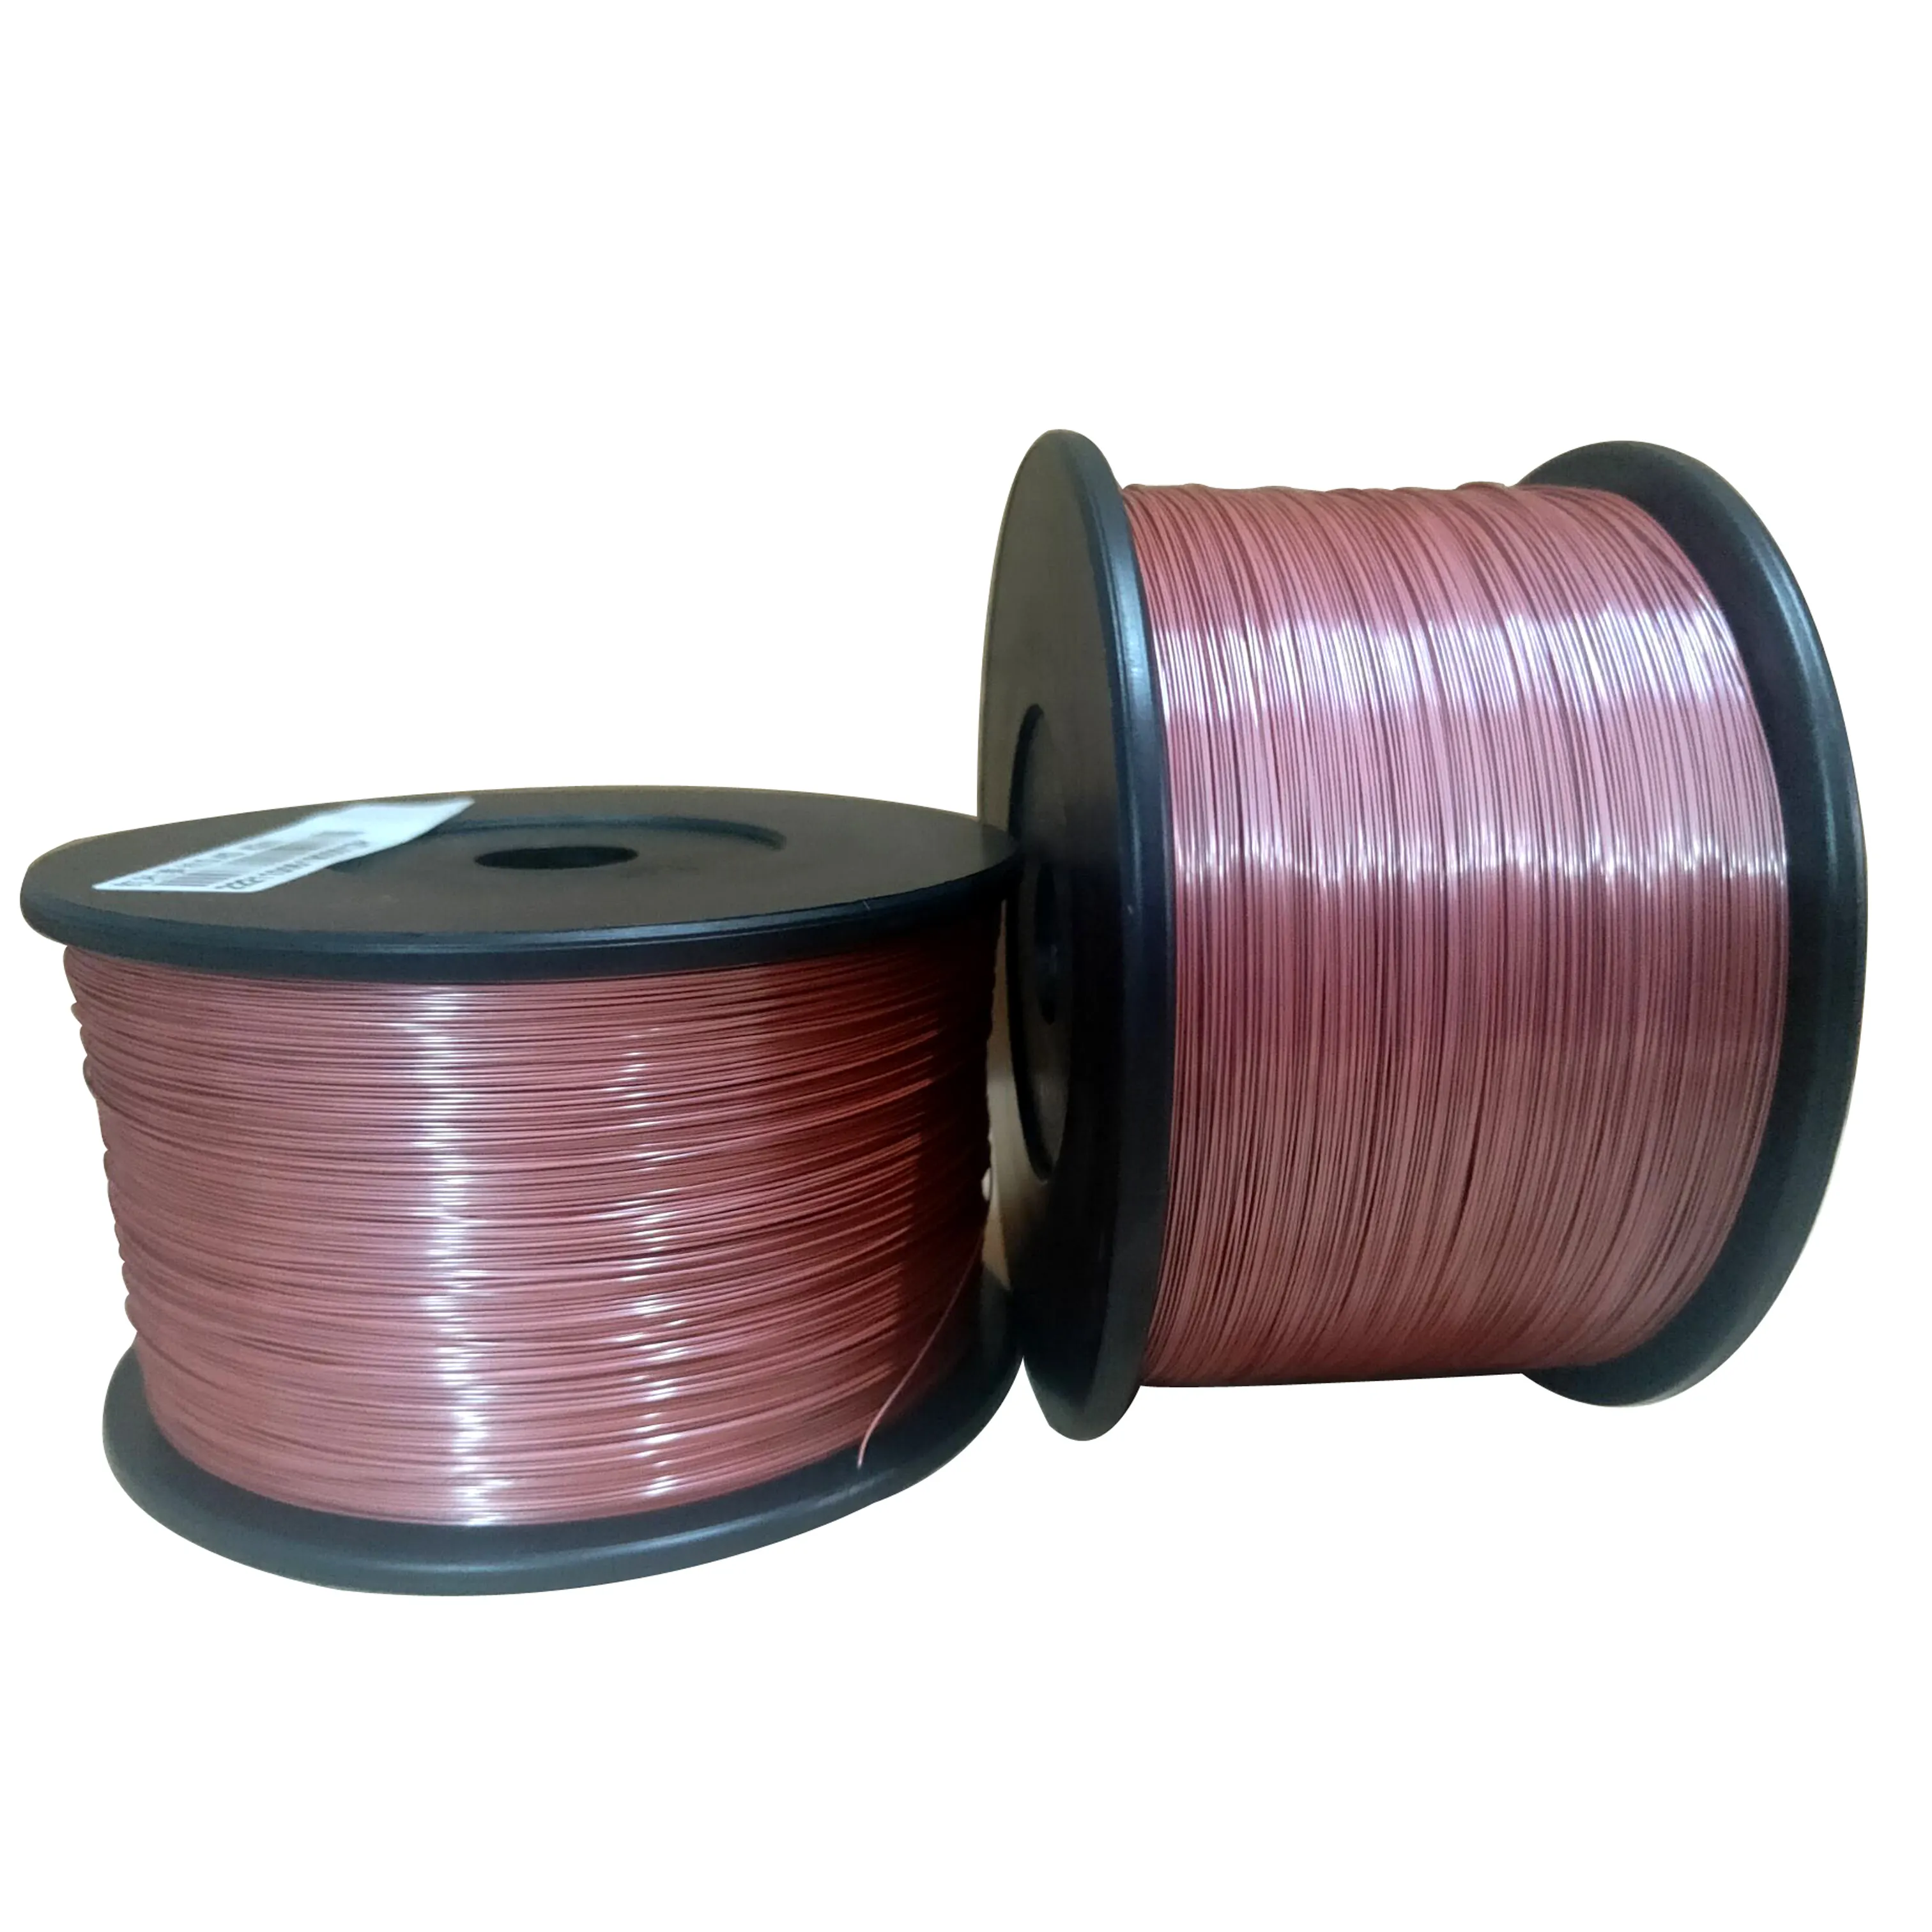 Good Sales High Quality Excellent Borated red/yellow/Oxidized  Dumet Wire For Lamps or Diodes